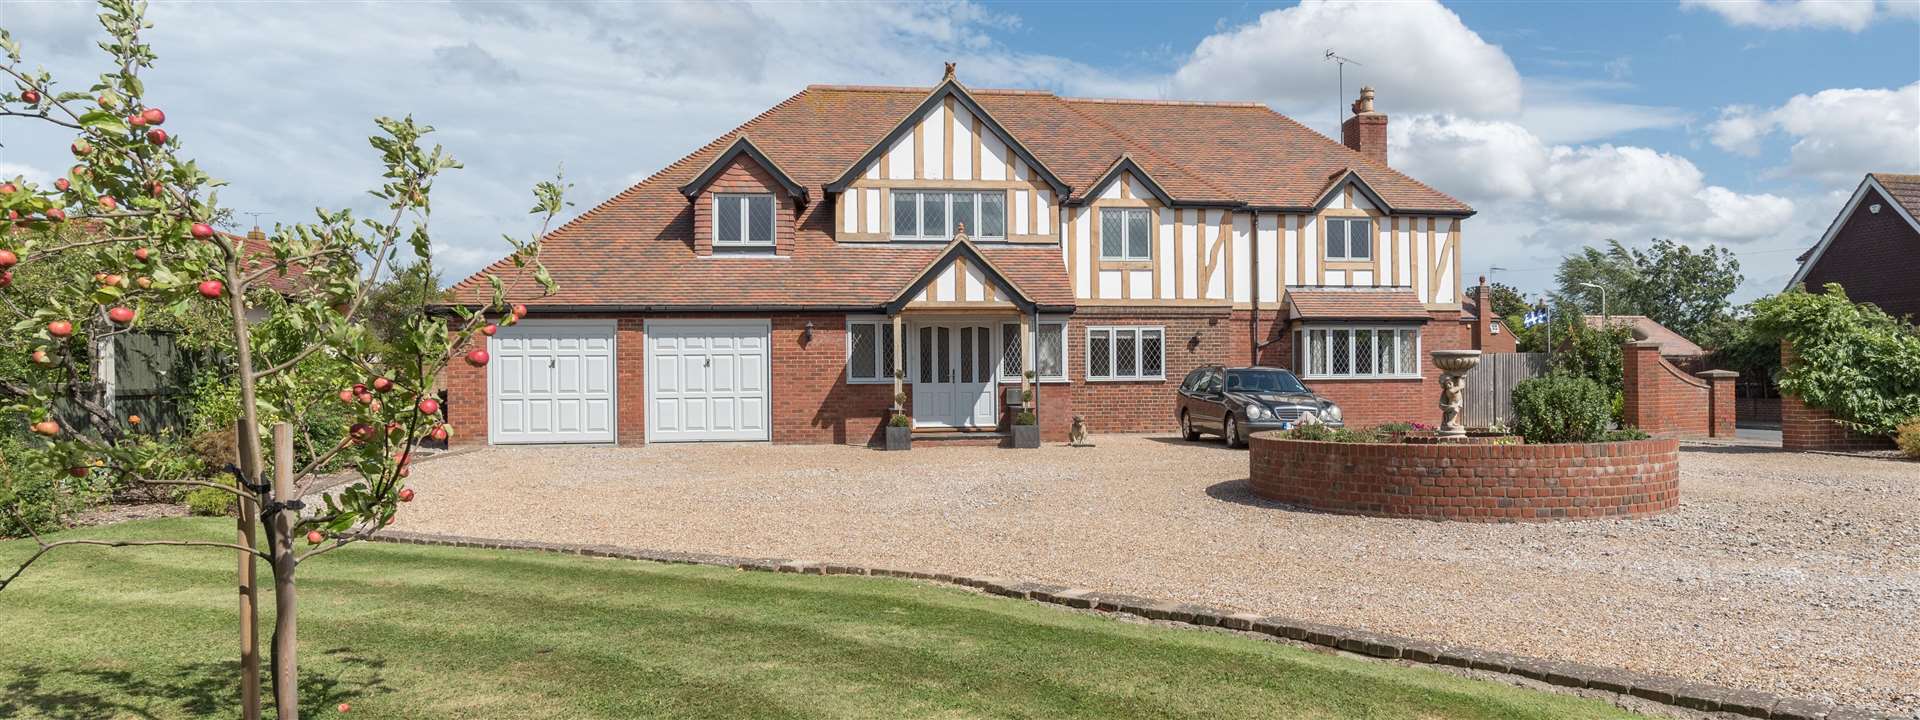 Abbotsmead is for sale with Strutt & Parker